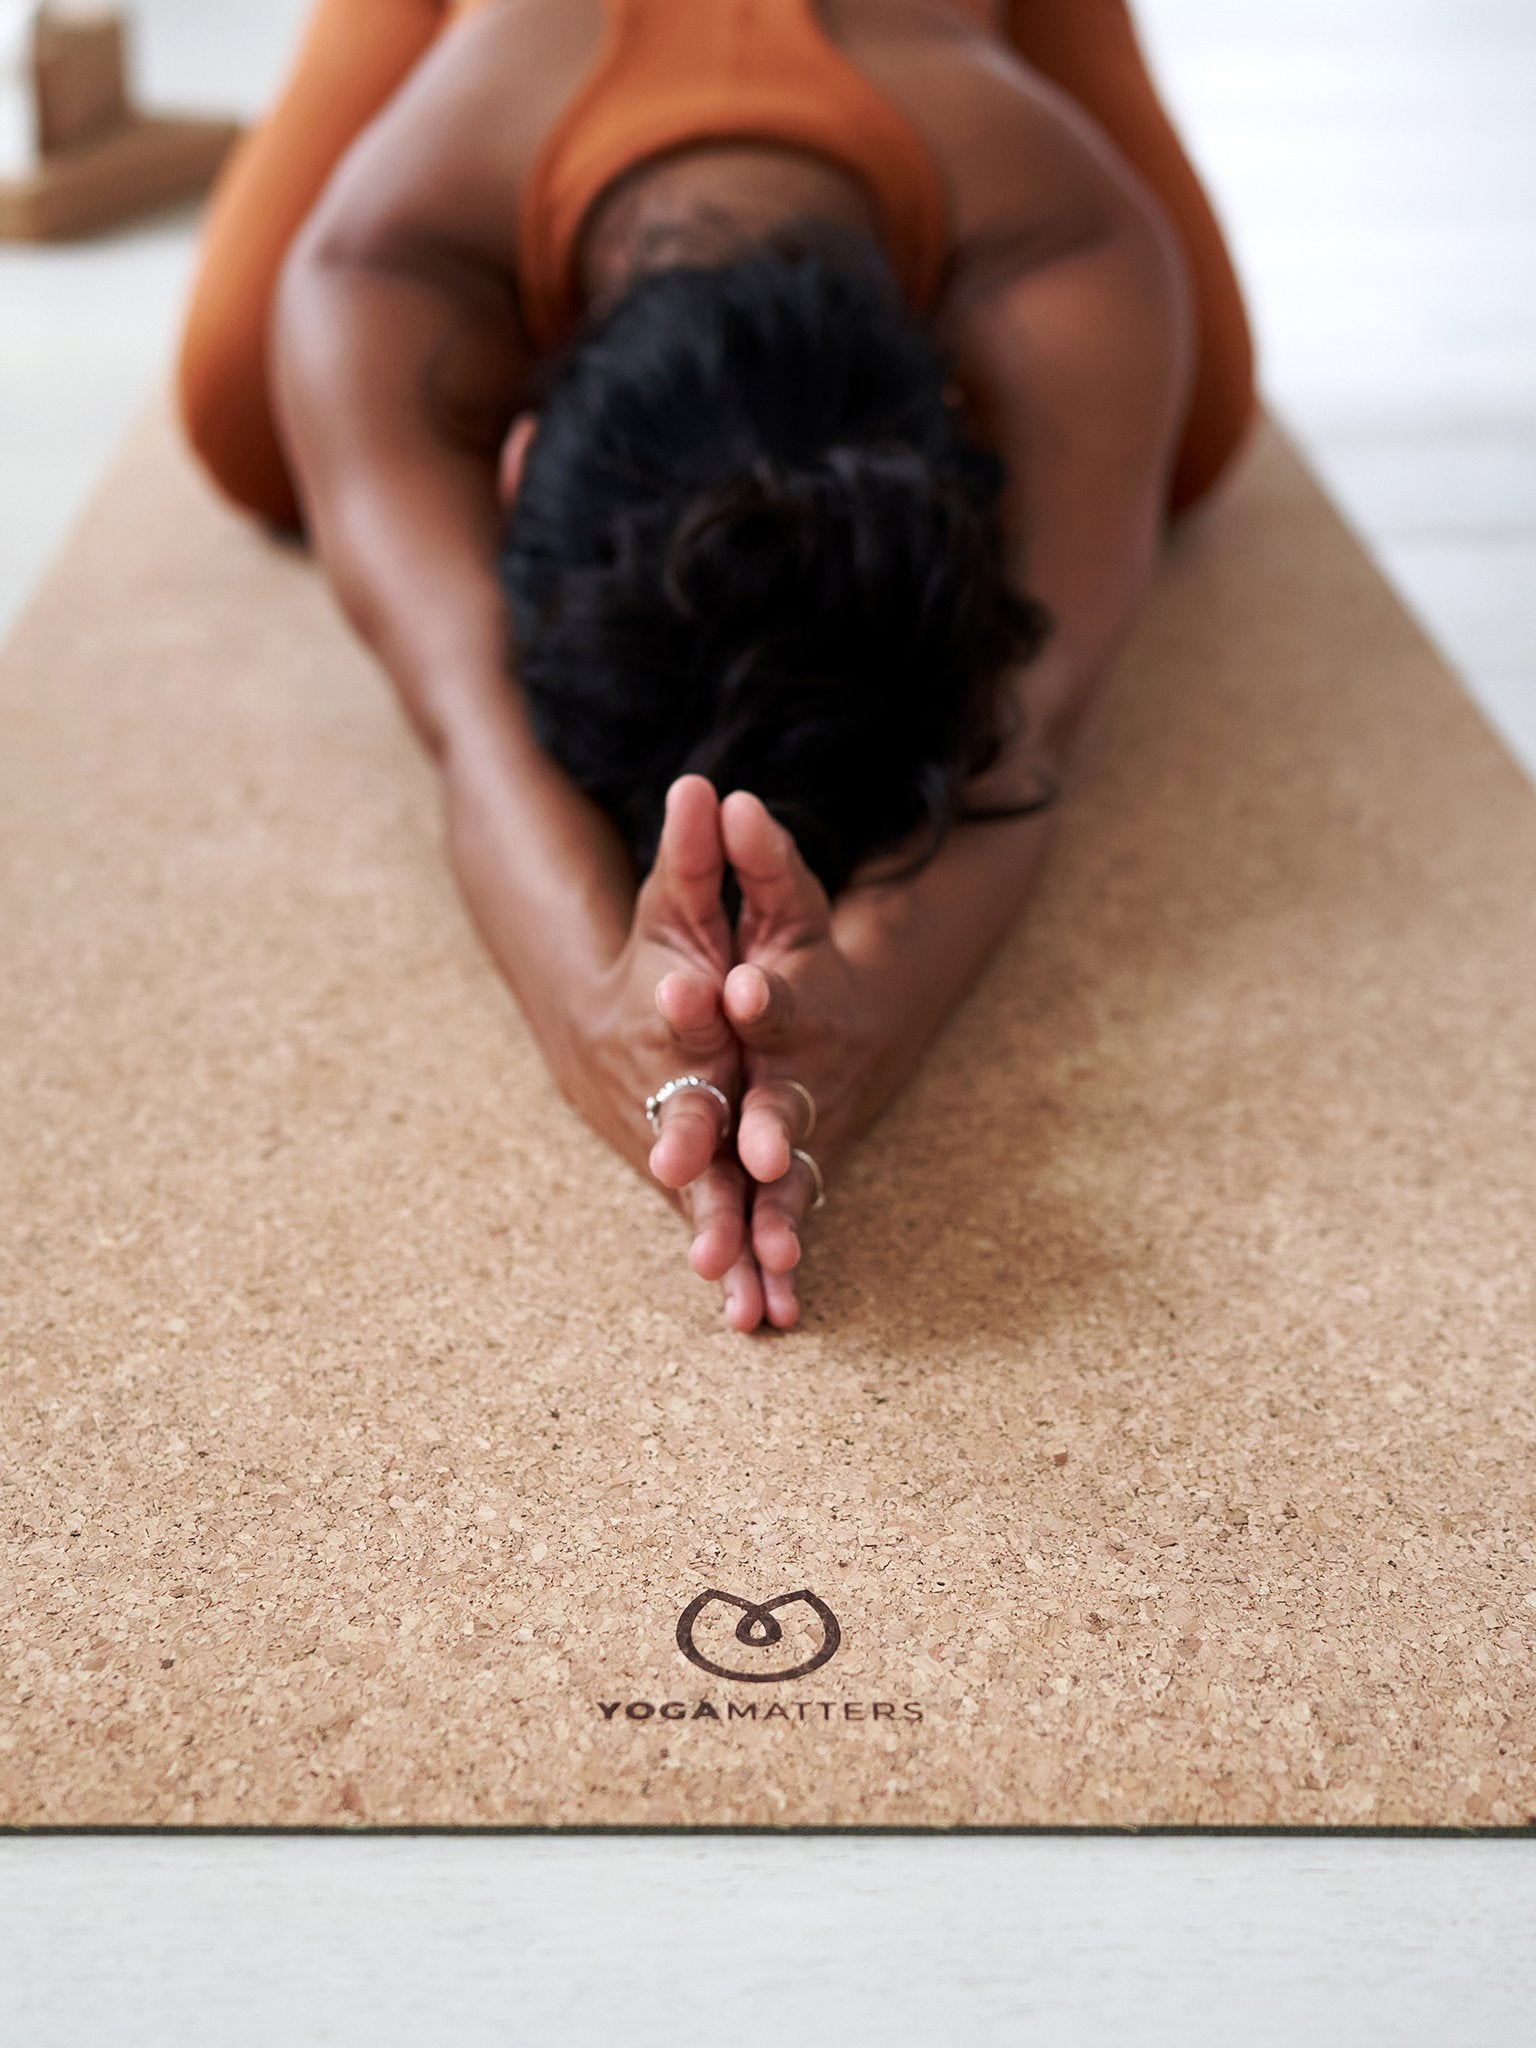 Person practicing yoga on a YogaMatters cork yoga mat, demonstrating forward bend pose, shot from the front with focus on the textured surface and brand logo.